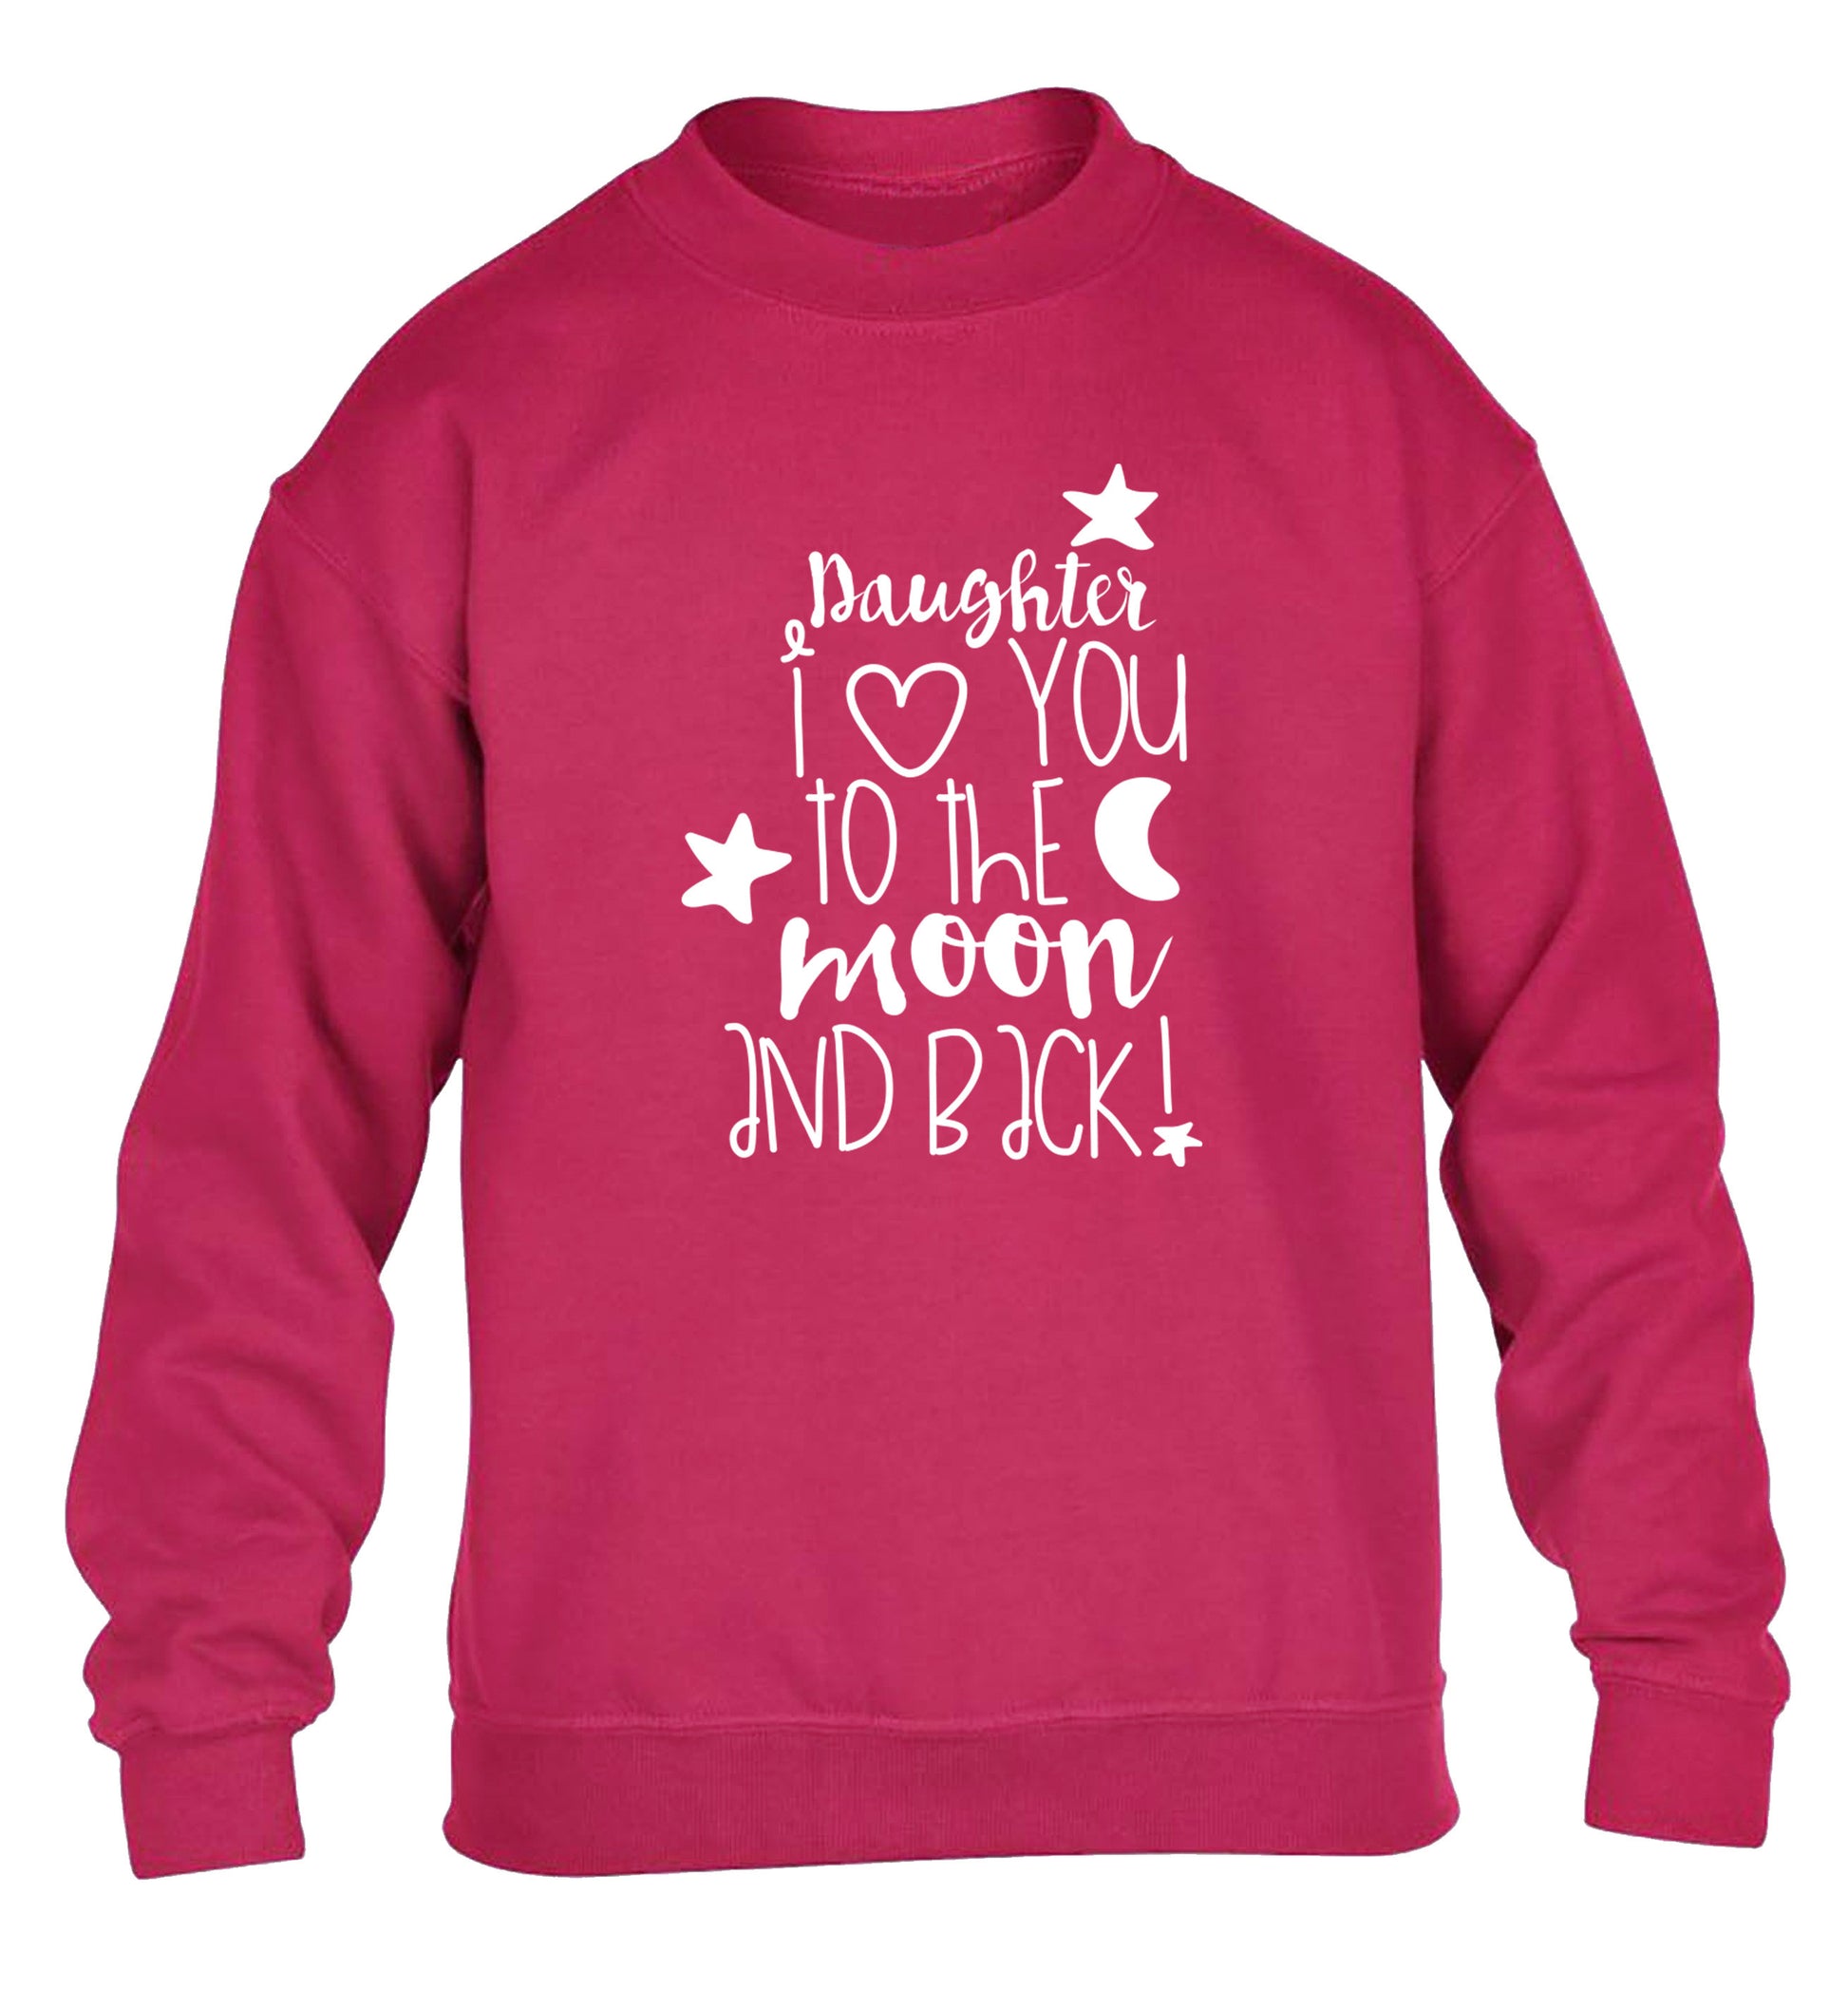 Daughter I love you to the moon and back children's pink  sweater 12-14 Years